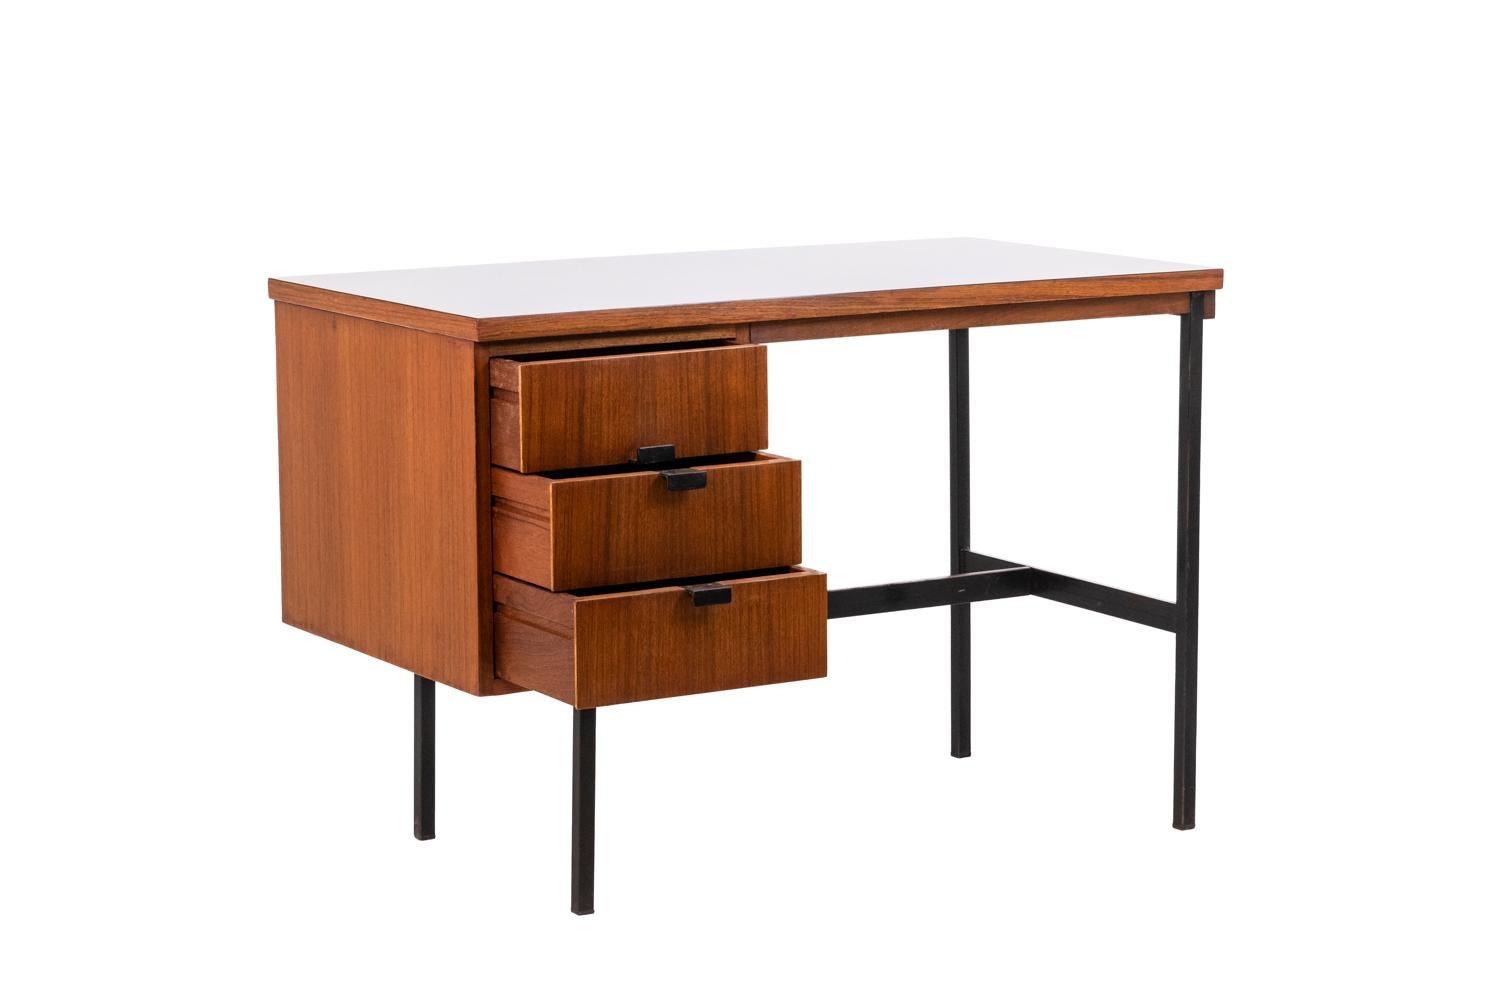 Jacques Hitier for Multiplex, Desk “Multitaple” in Mahogany, 1950s For Sale  at 1stDibs